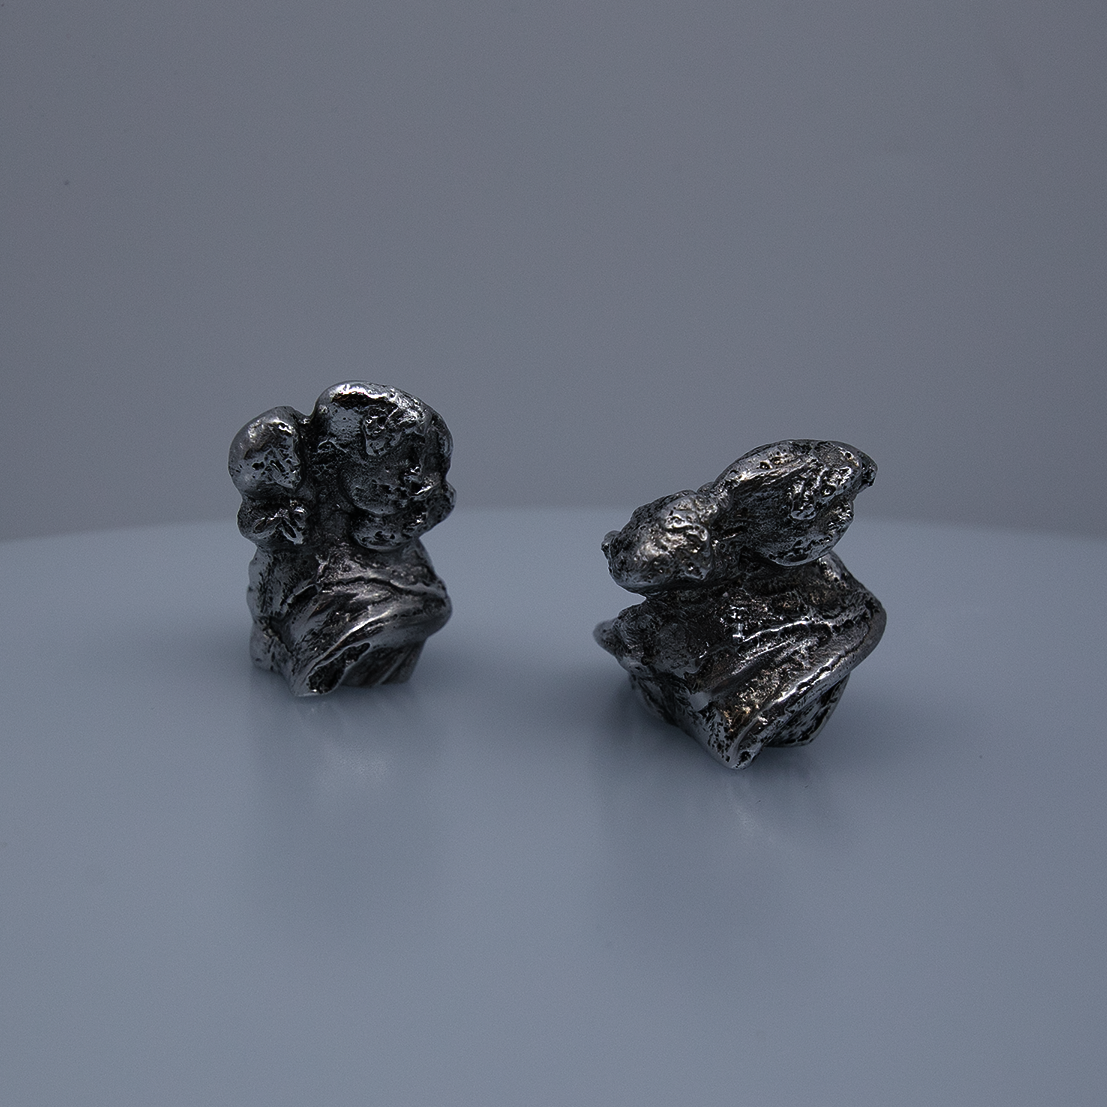 Two small aluminum figures with multiple heads.